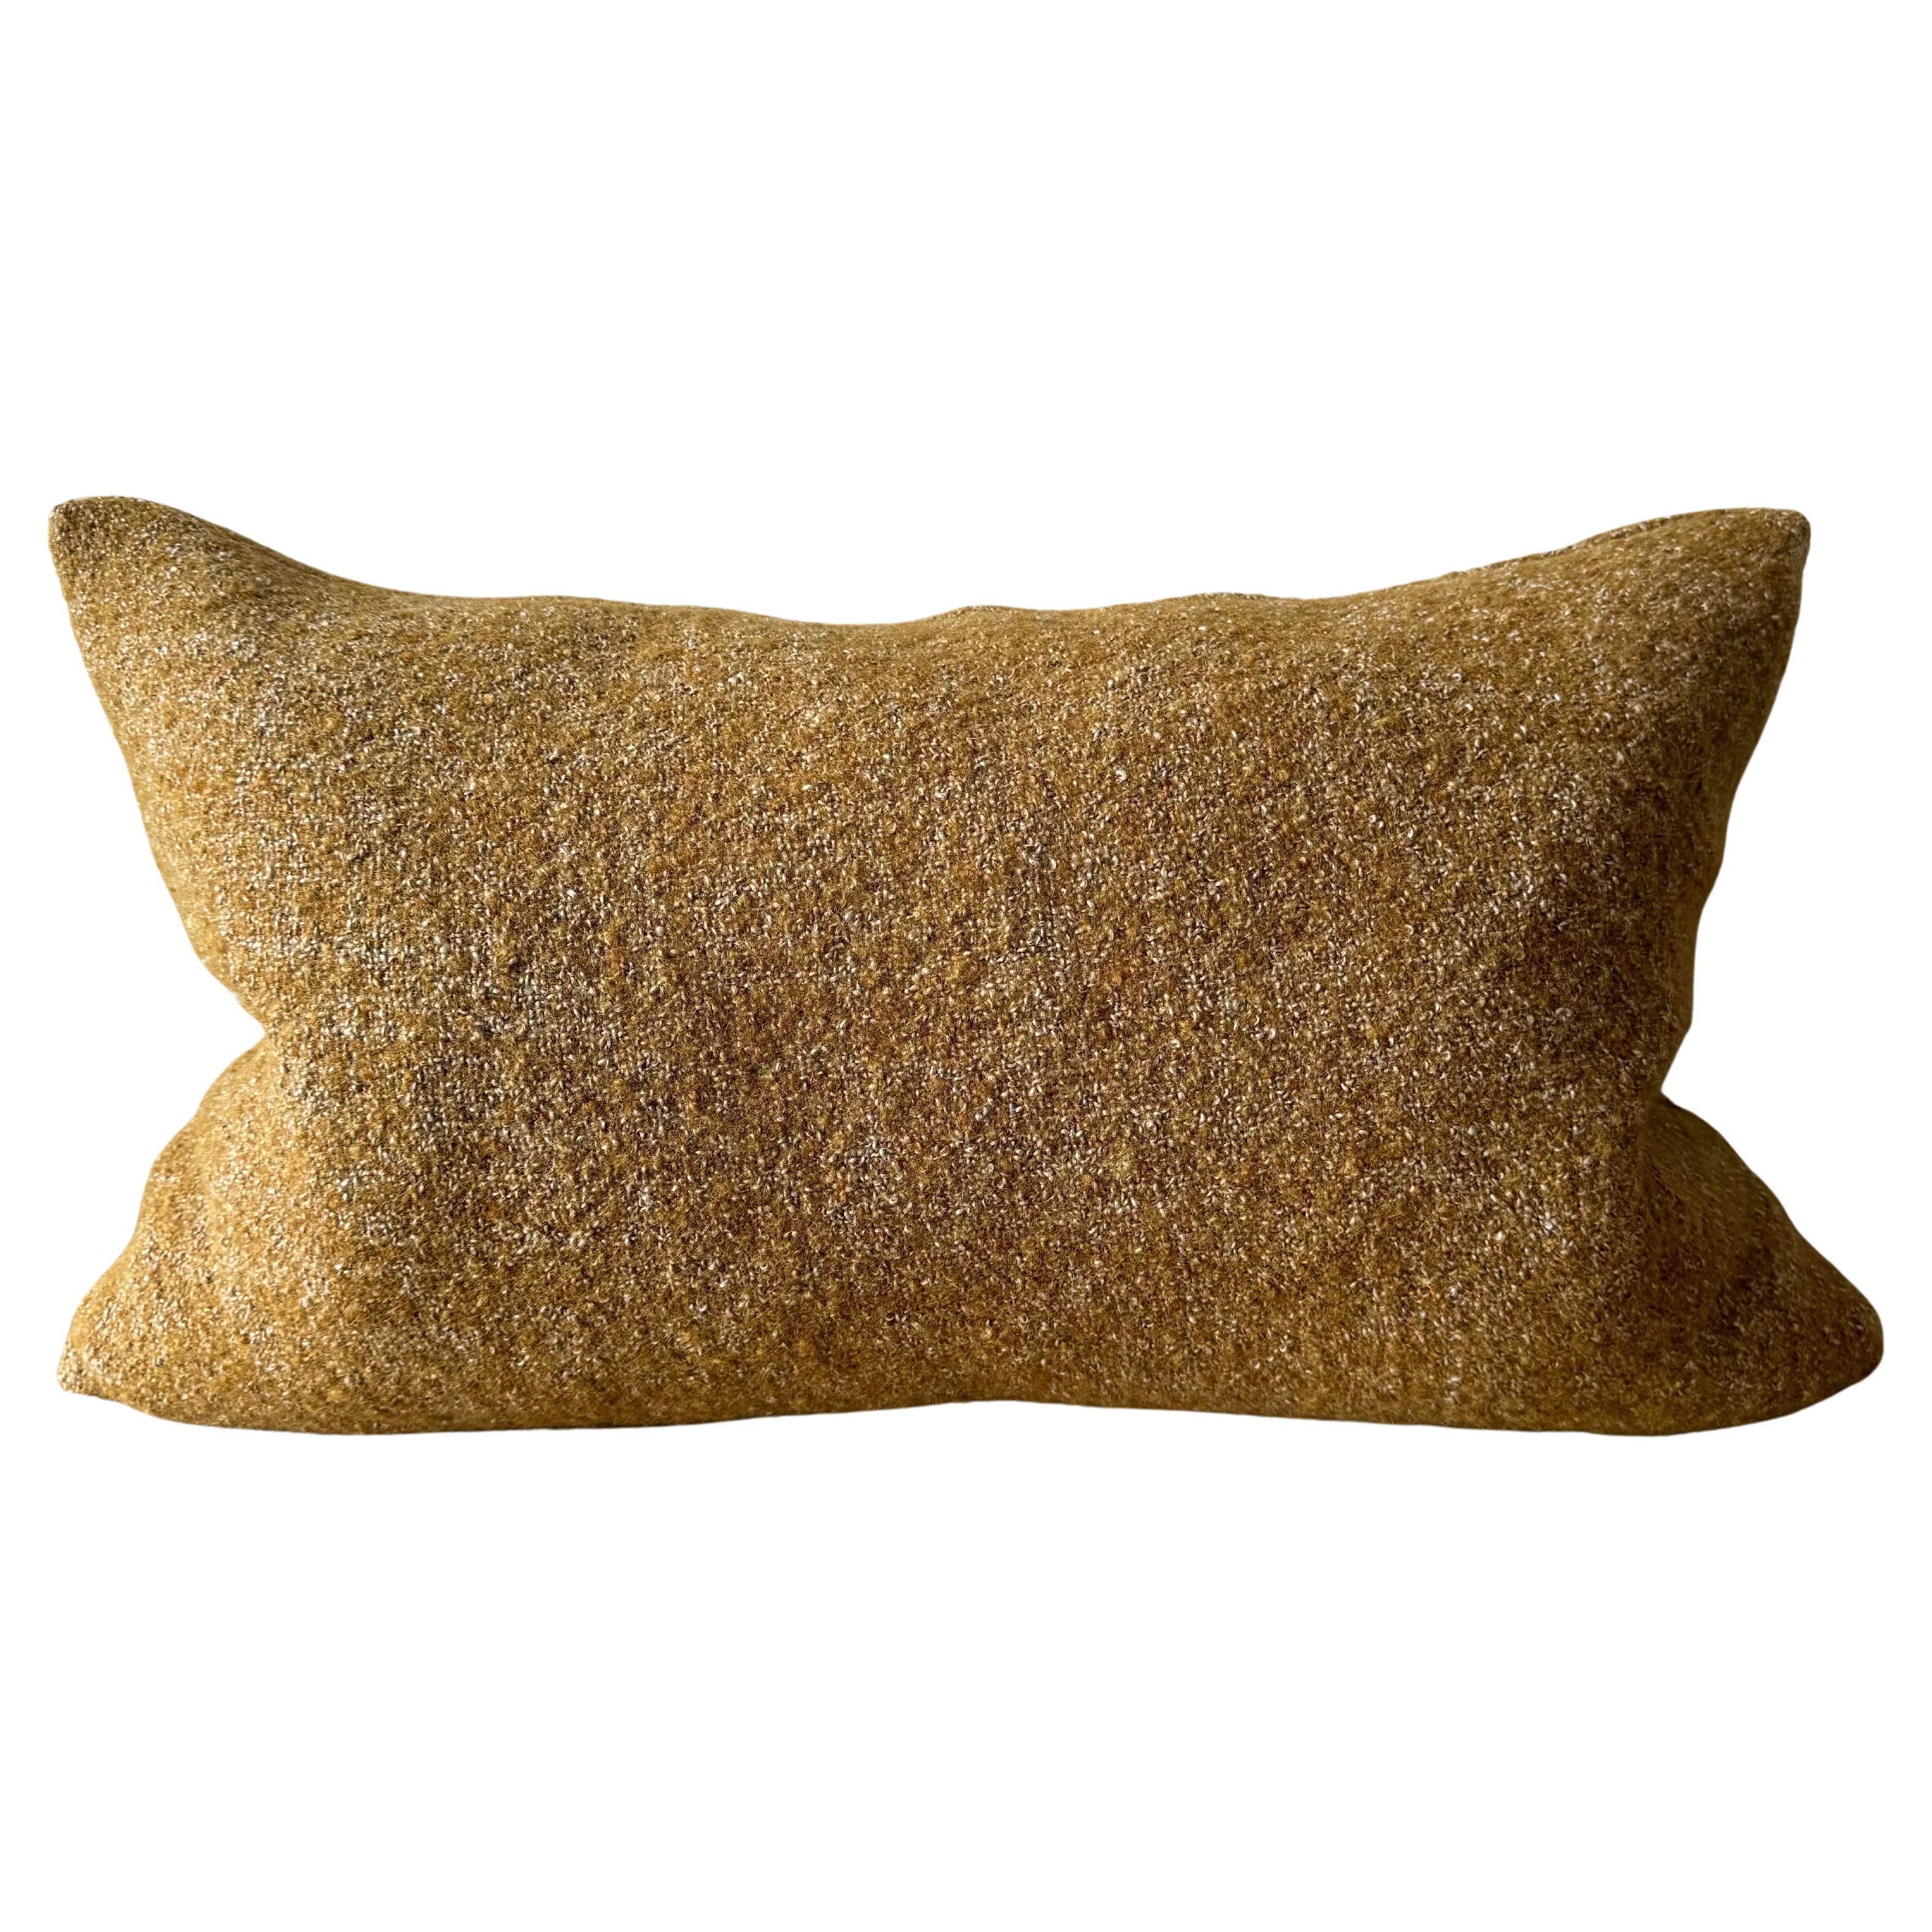 Custom Linen and Wool Lumbar Pillow in Ginger with Down Feather Insert For Sale